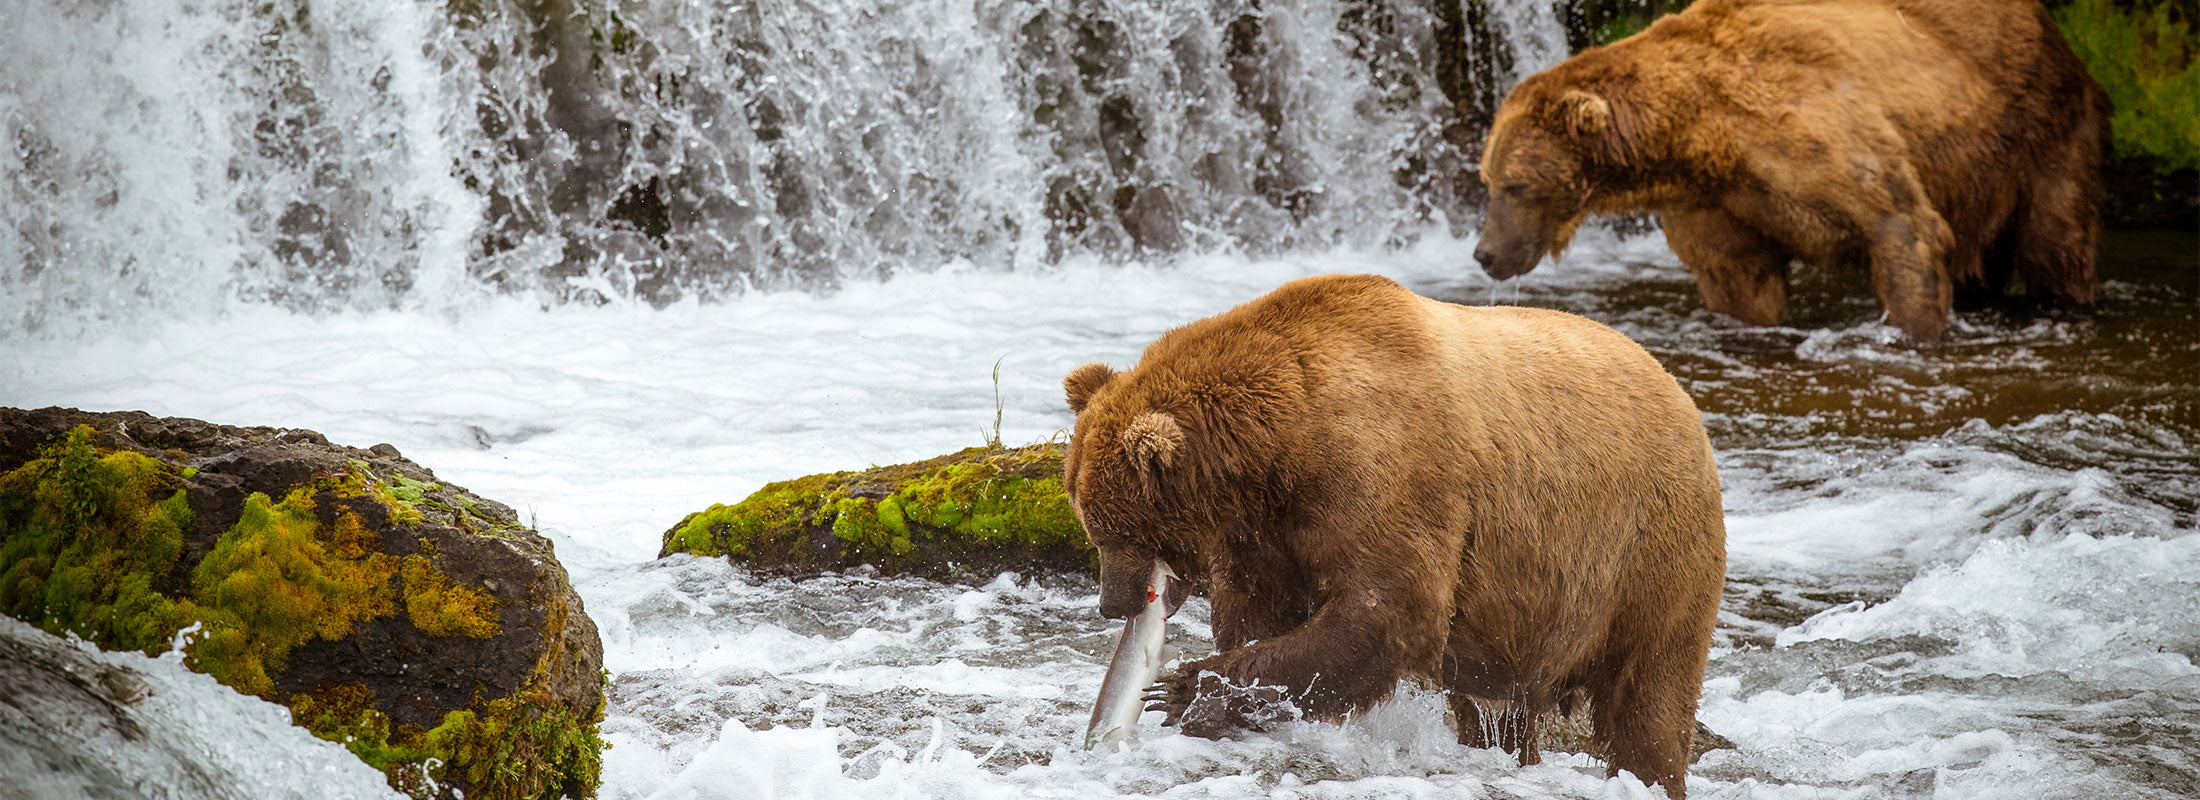 Two brown bears fish for salmon in a river at the base of a small waterfall